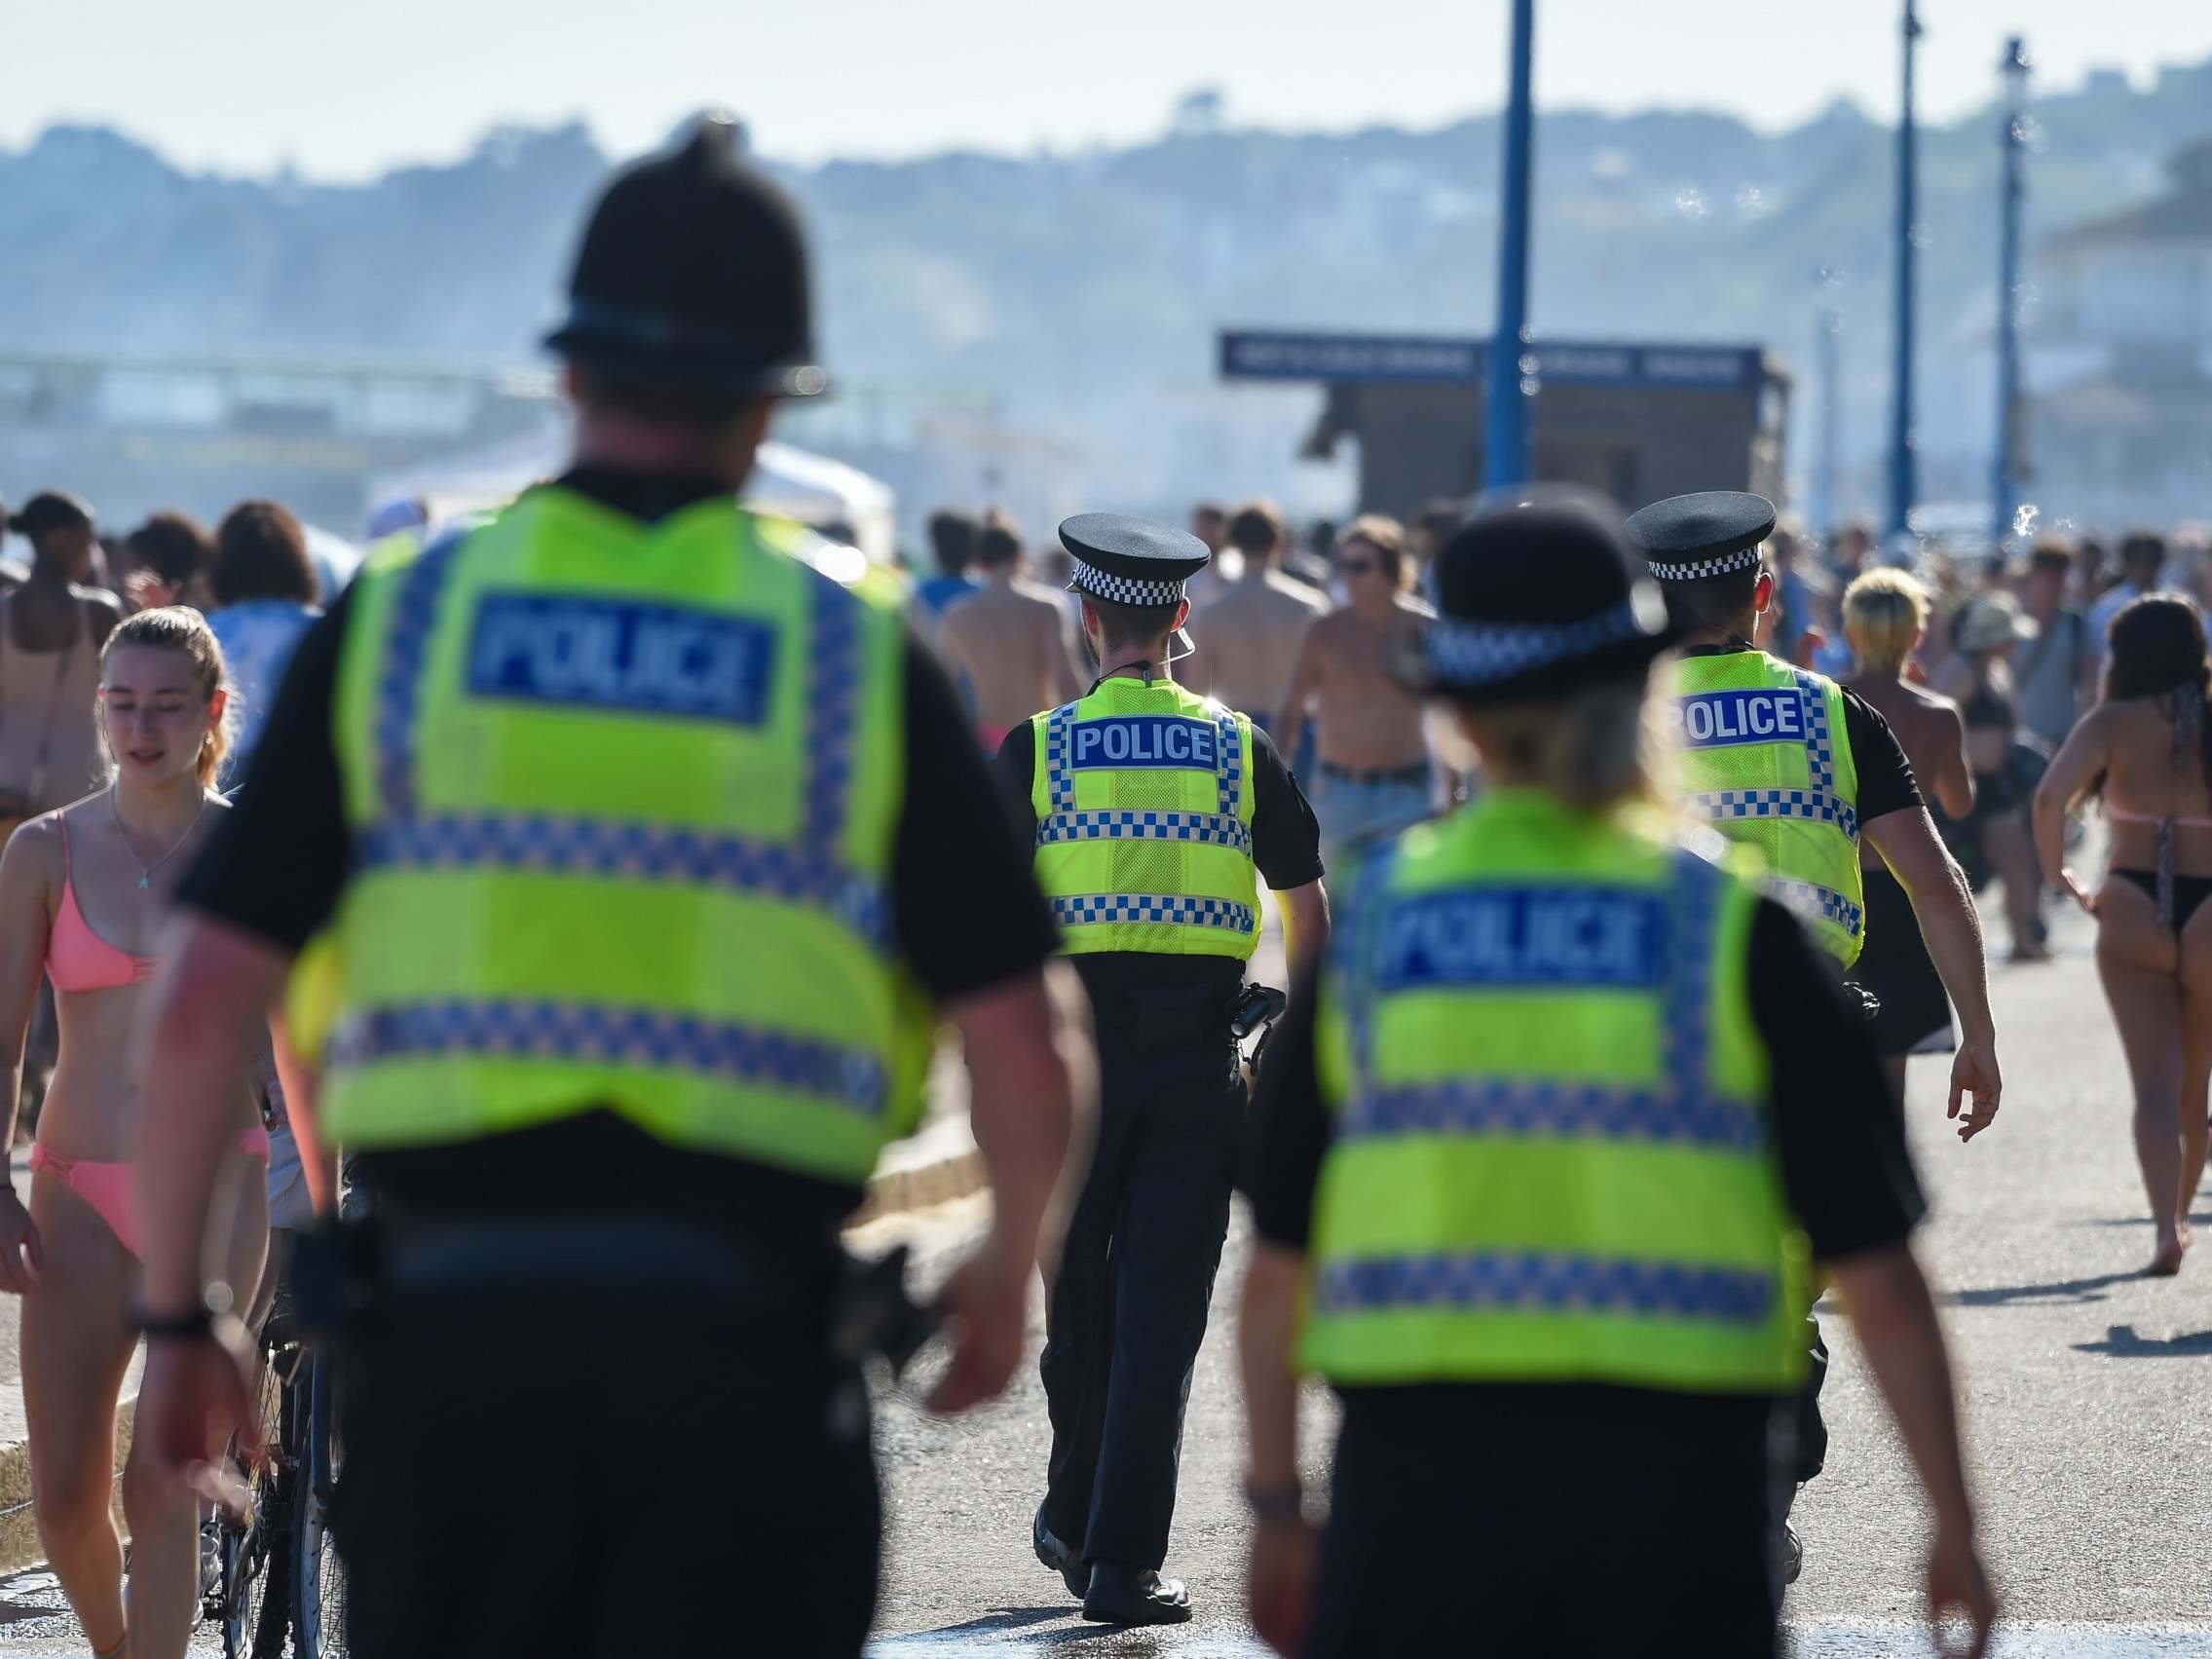 Police walk among sunseekers in Bournemouth yesterday